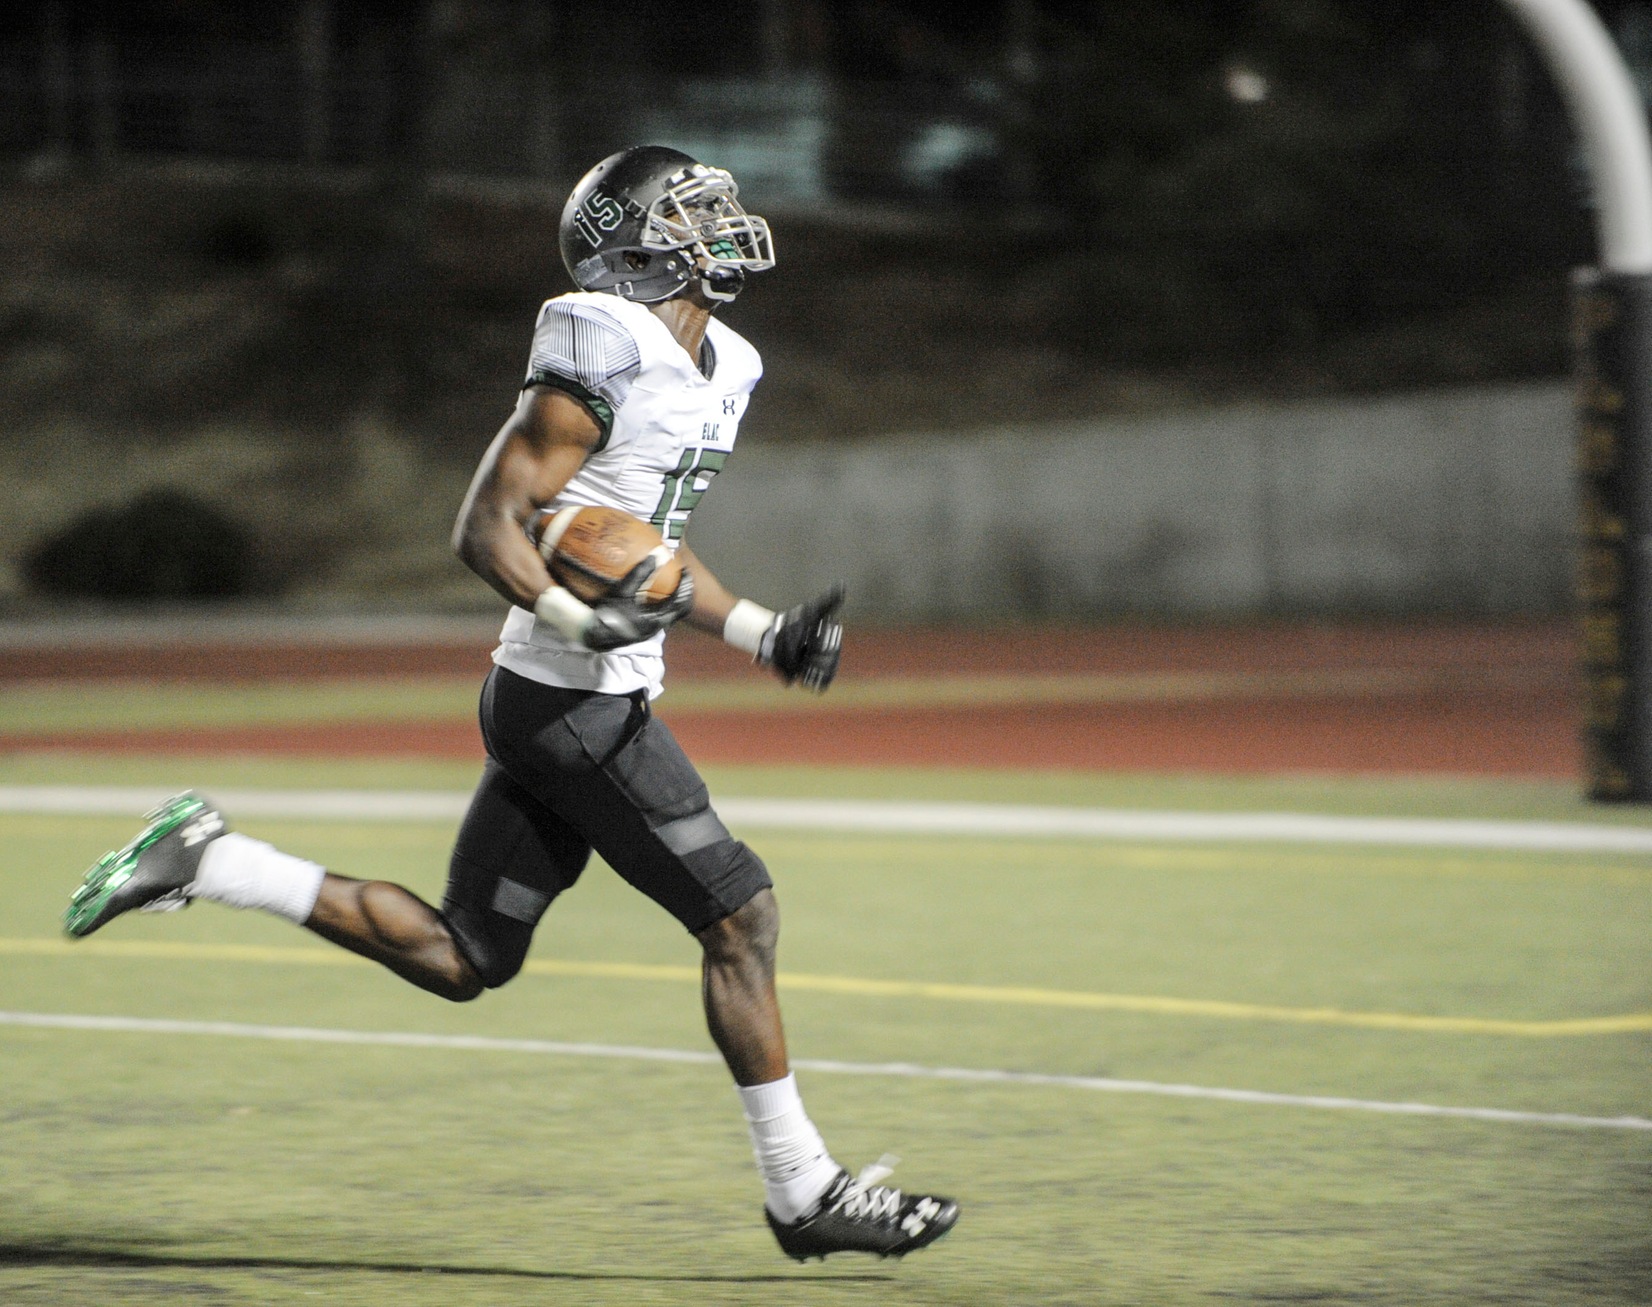 East Los Angeles College sophomore wide receiver Karon Cooper is about to score a touchdown from a 50-yard reception in a 42-14 win on the road vs. Pasadena City College. (Photo by Tadzio Garcia)